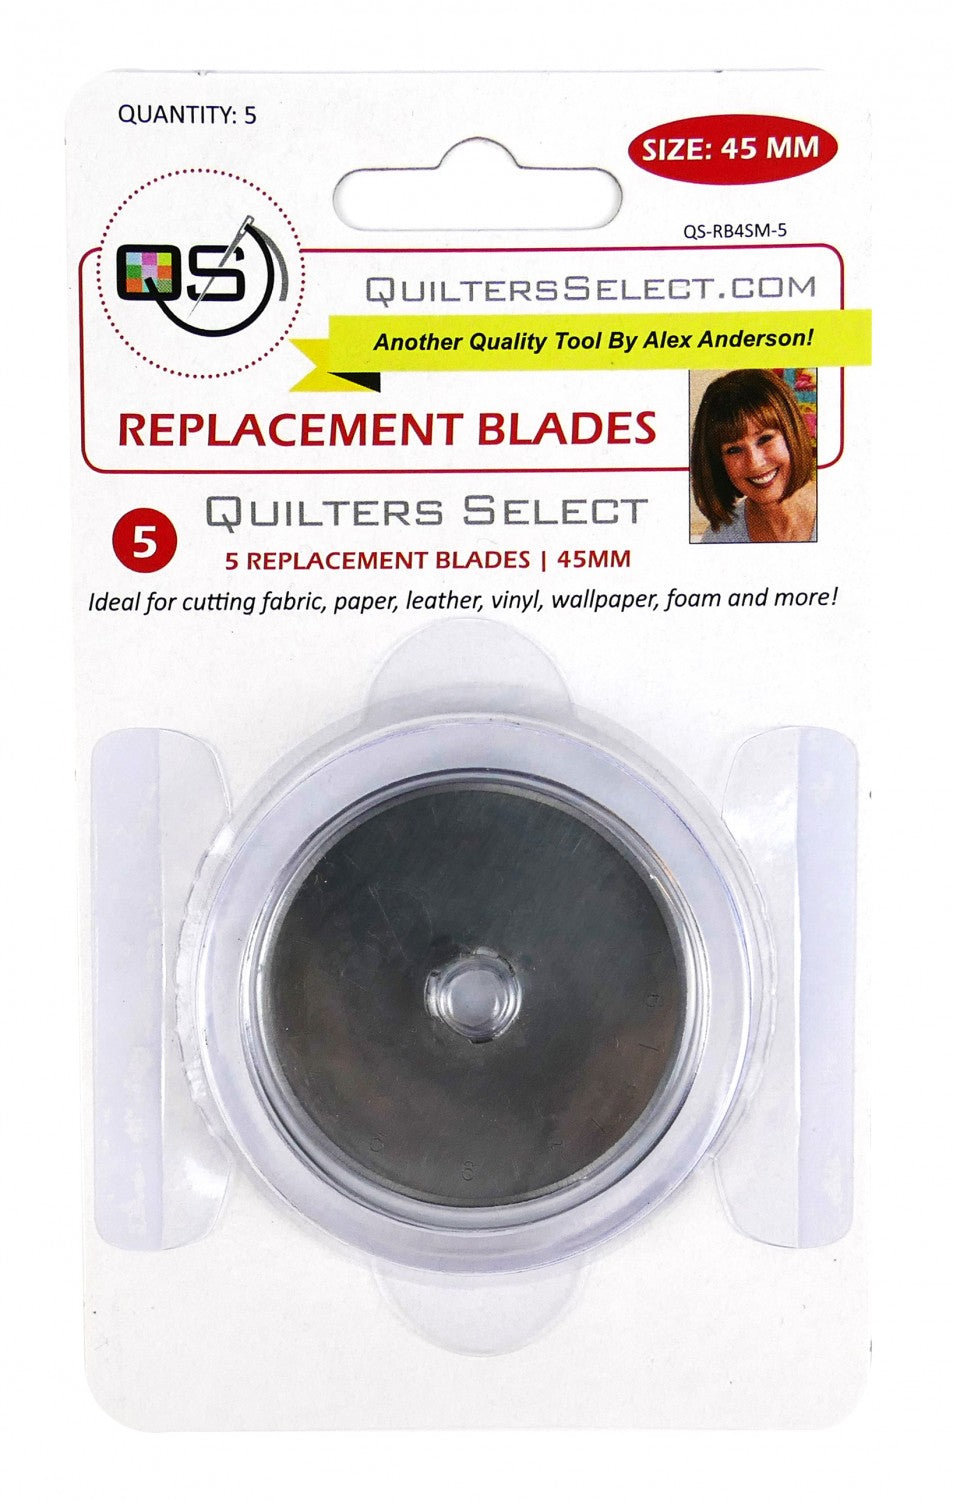 Quilters Select Replacement Blades